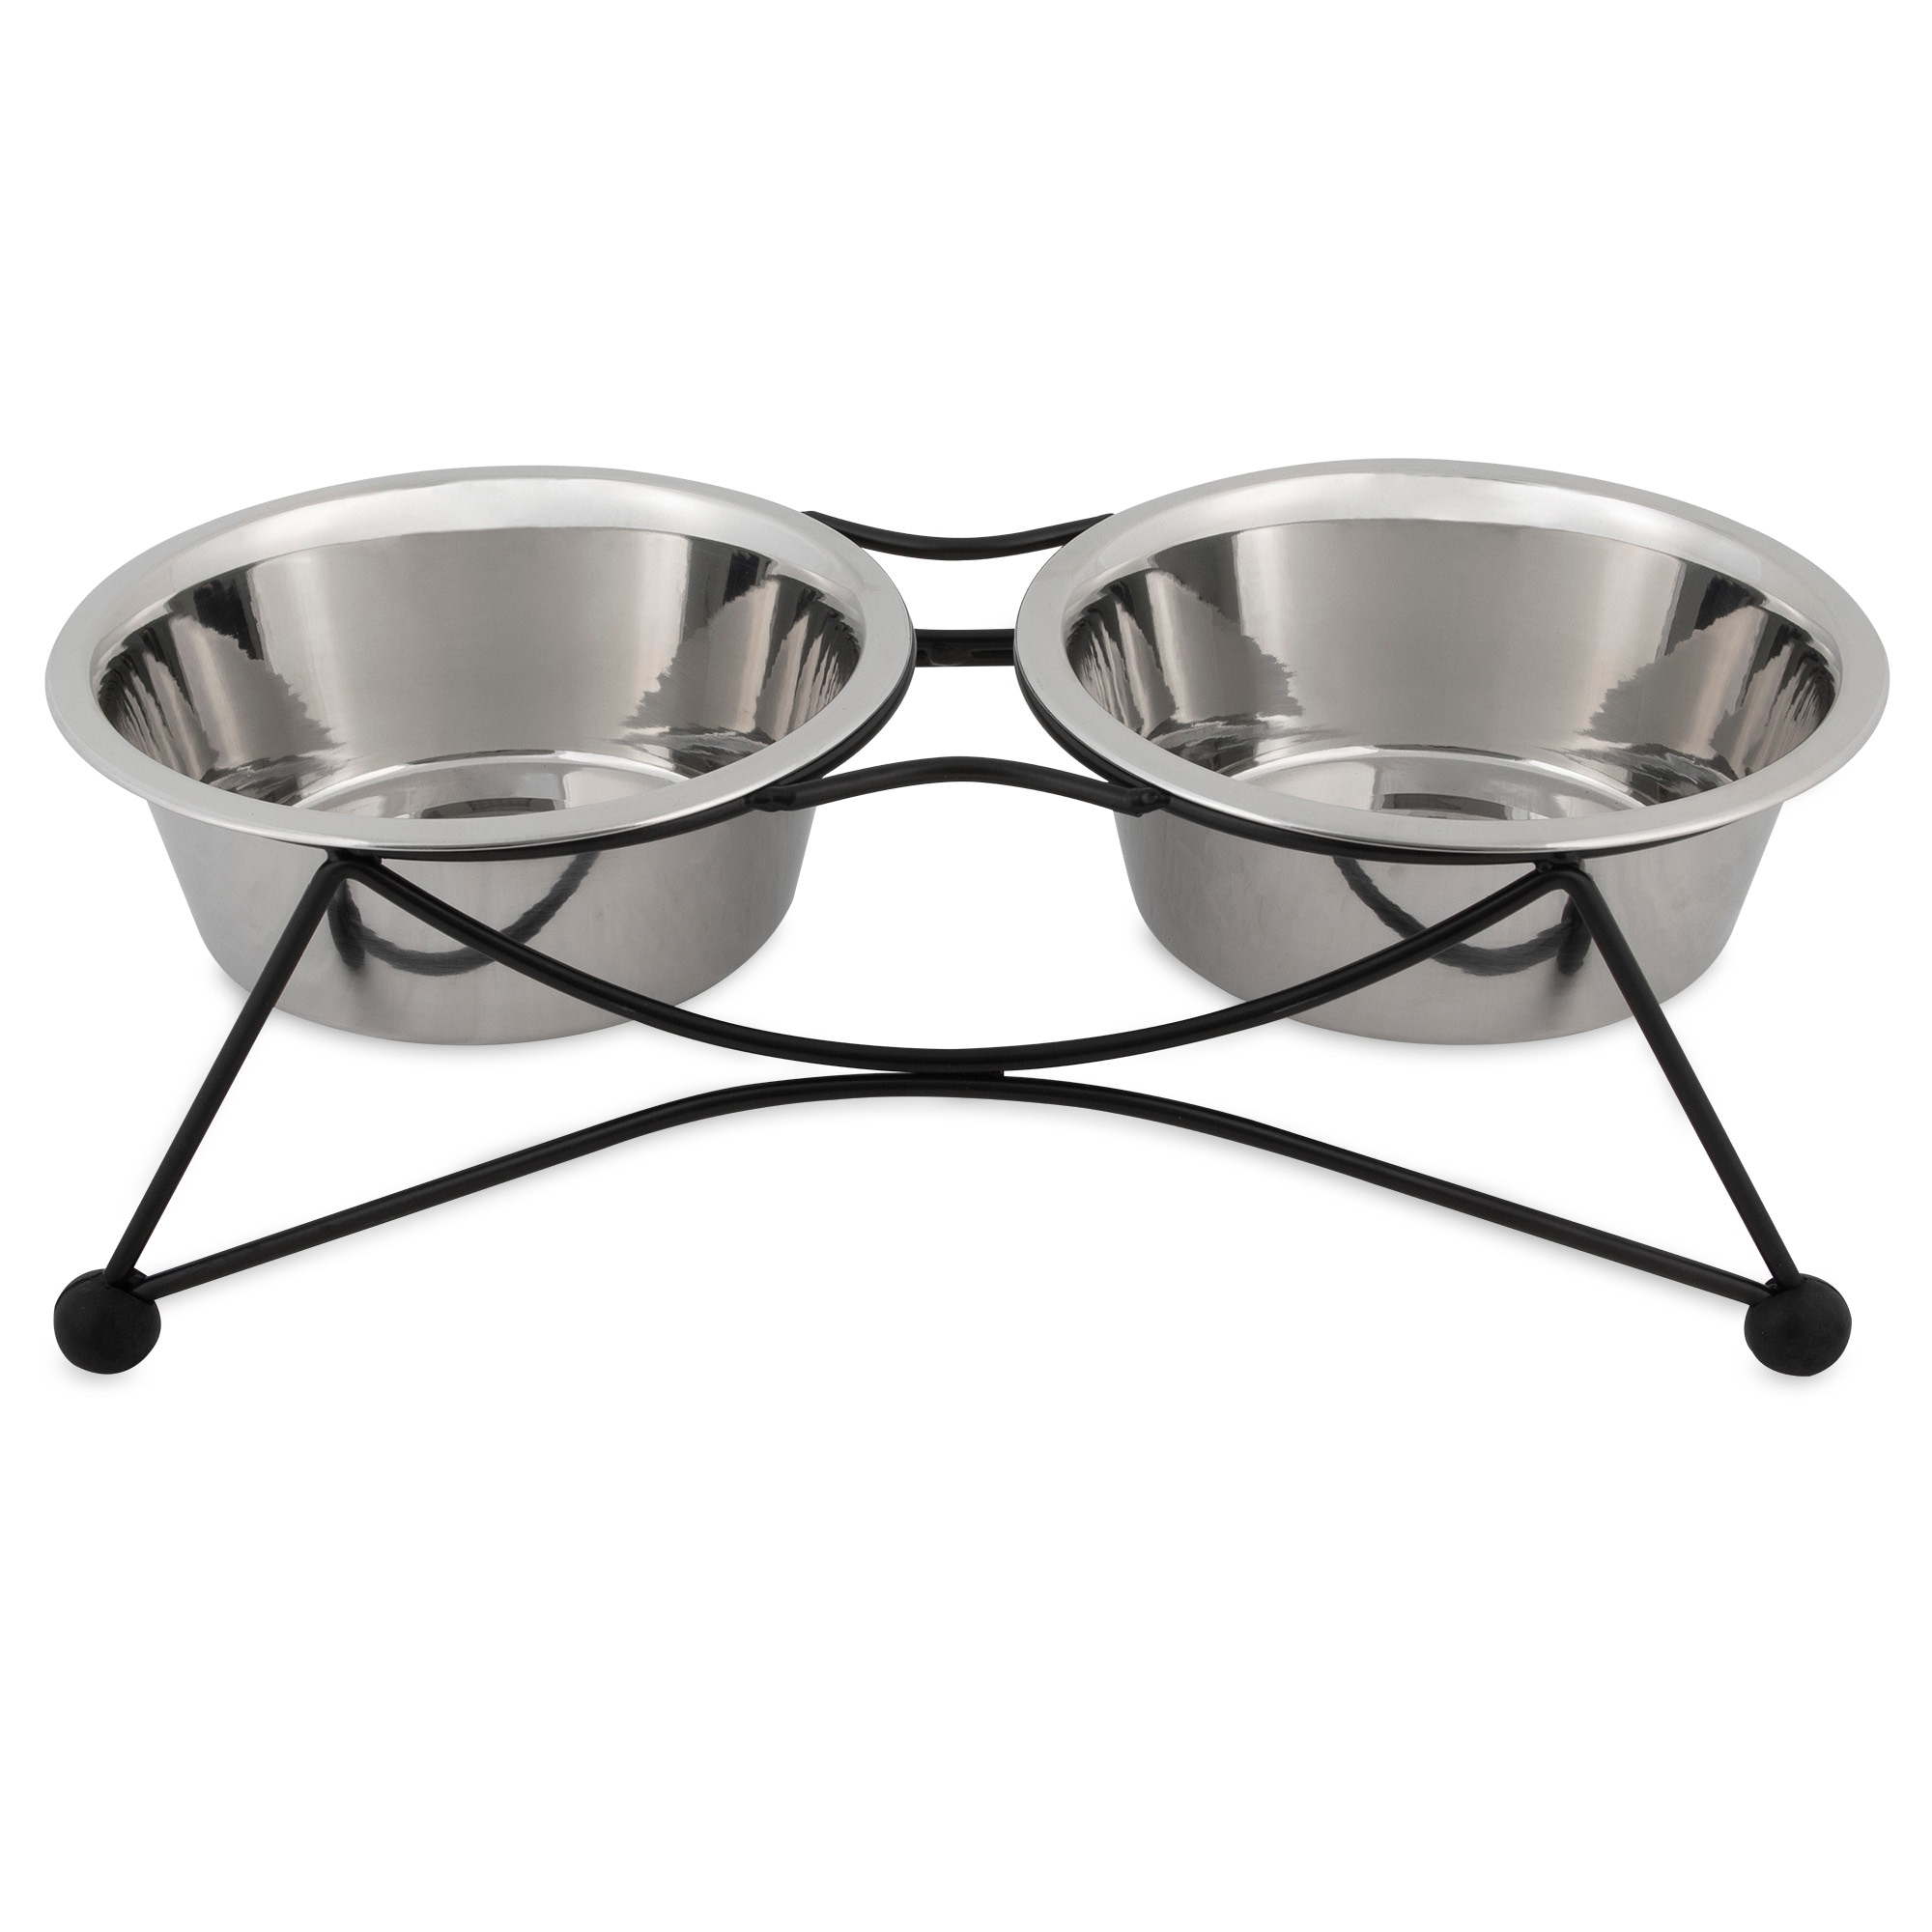 Raised Pet Bowls with Storage Function 2 Stainless Steel Dog Bowls Elevated  Base, 1 Unit - Harris Teeter